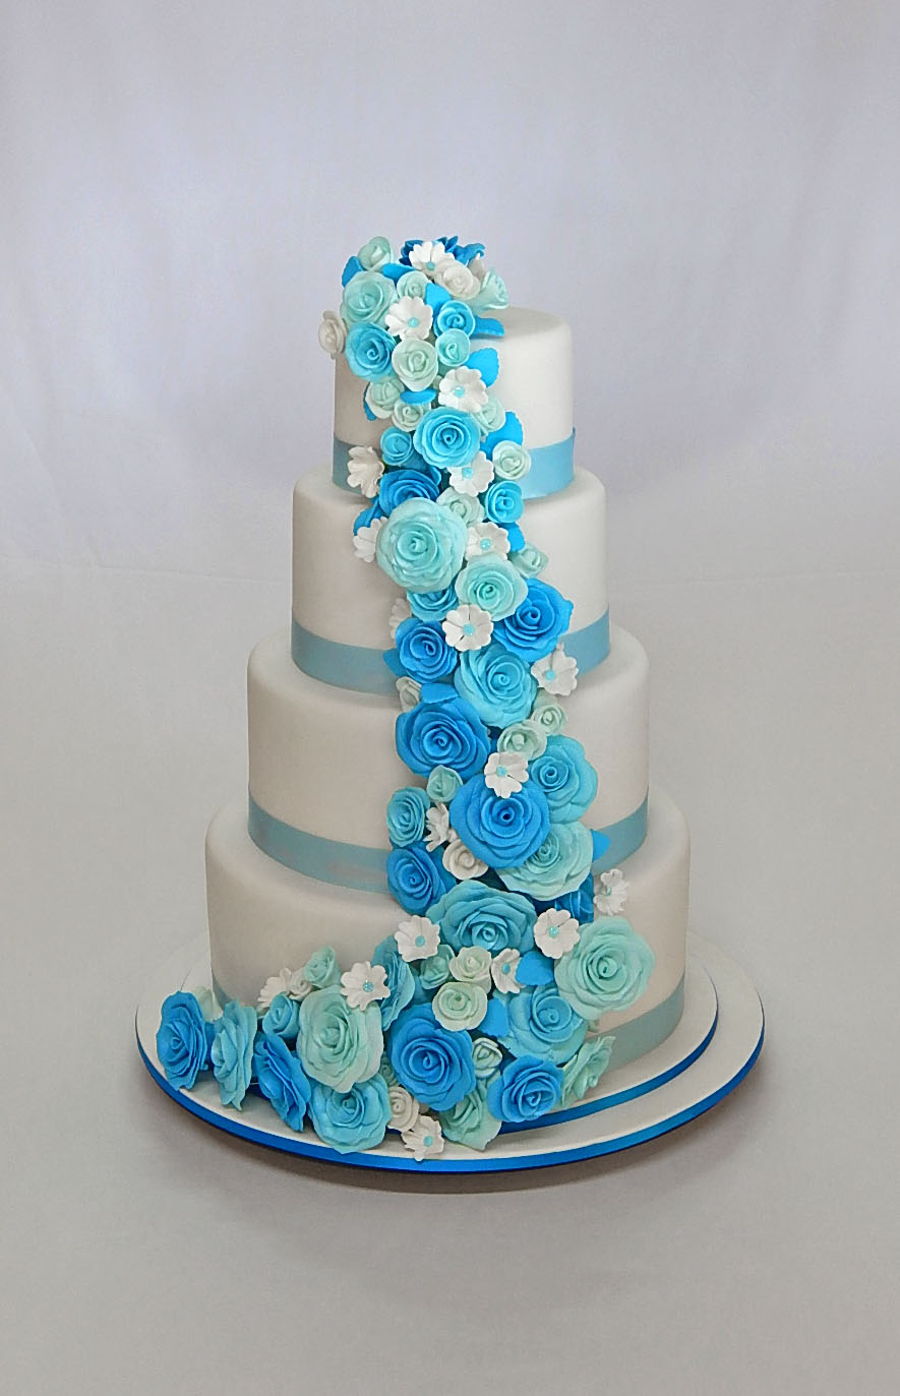 Wedding Cakes with Roses and Turquoise